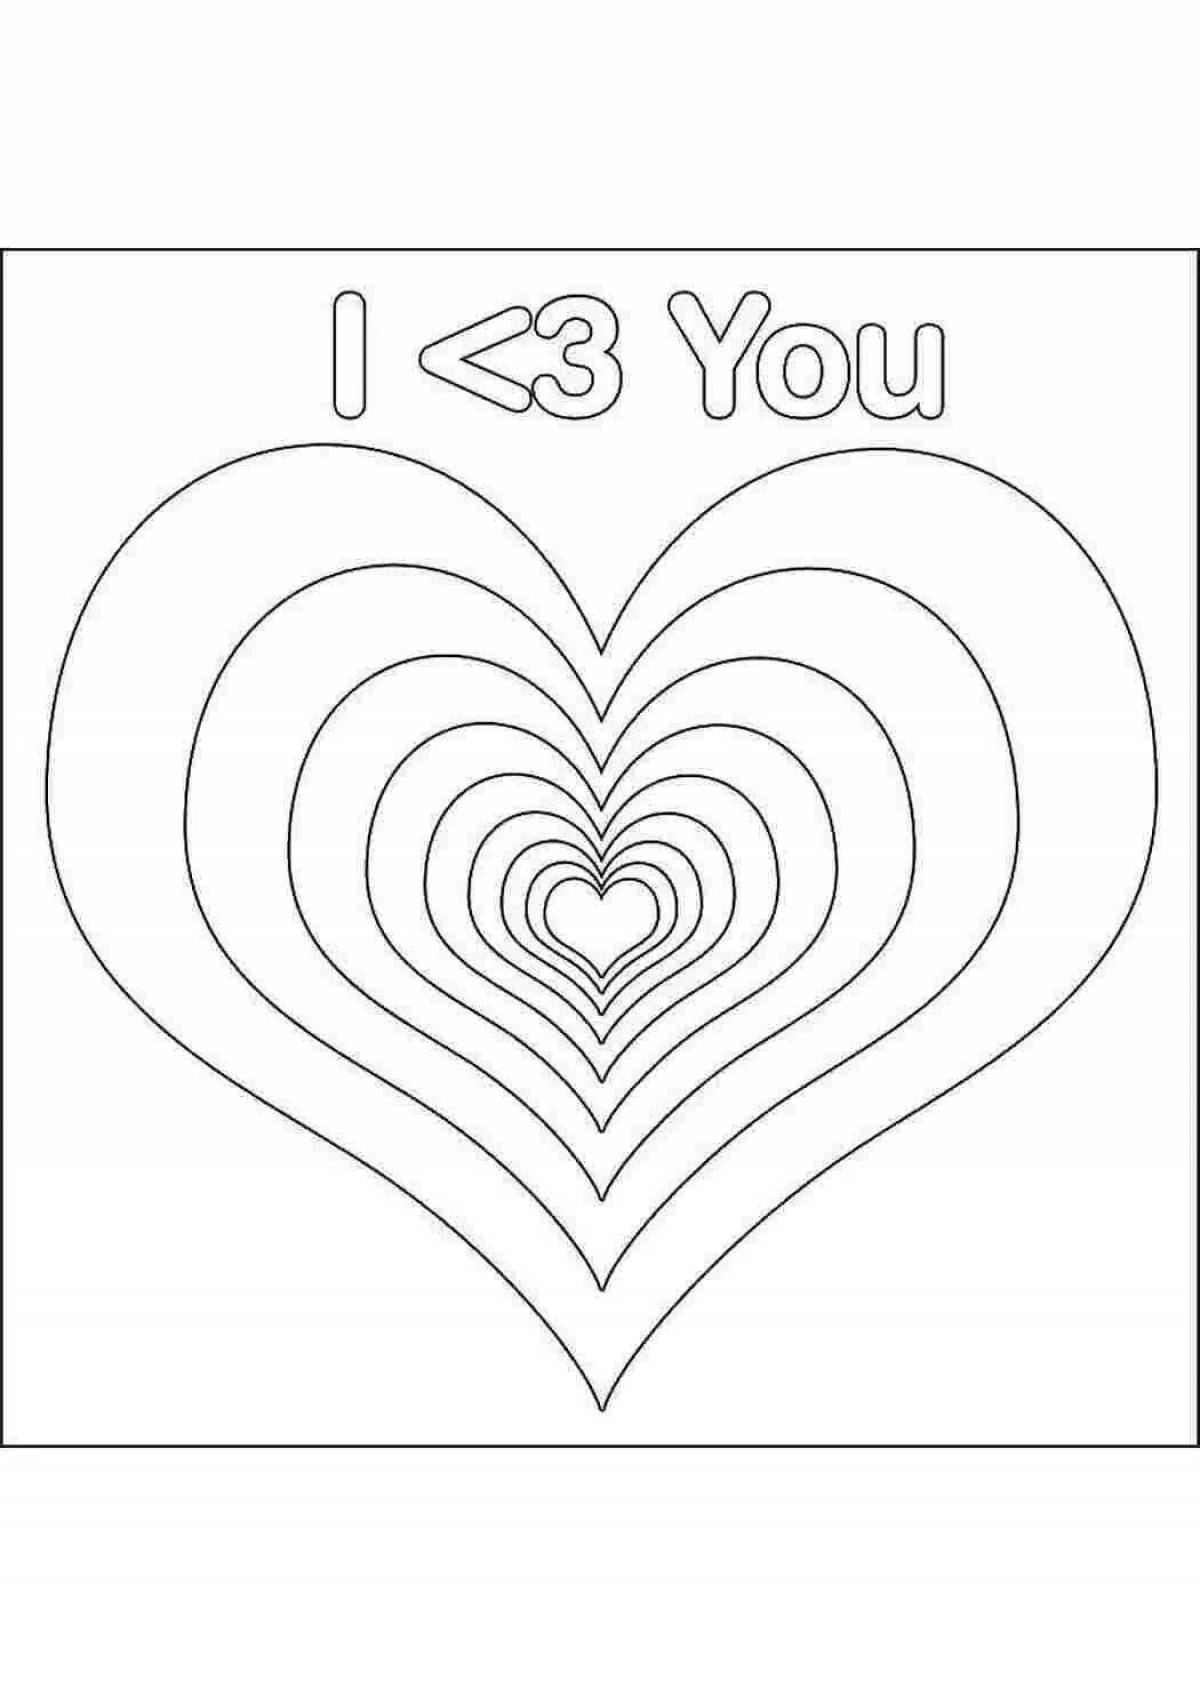 Colourful rainbow heart coloring page